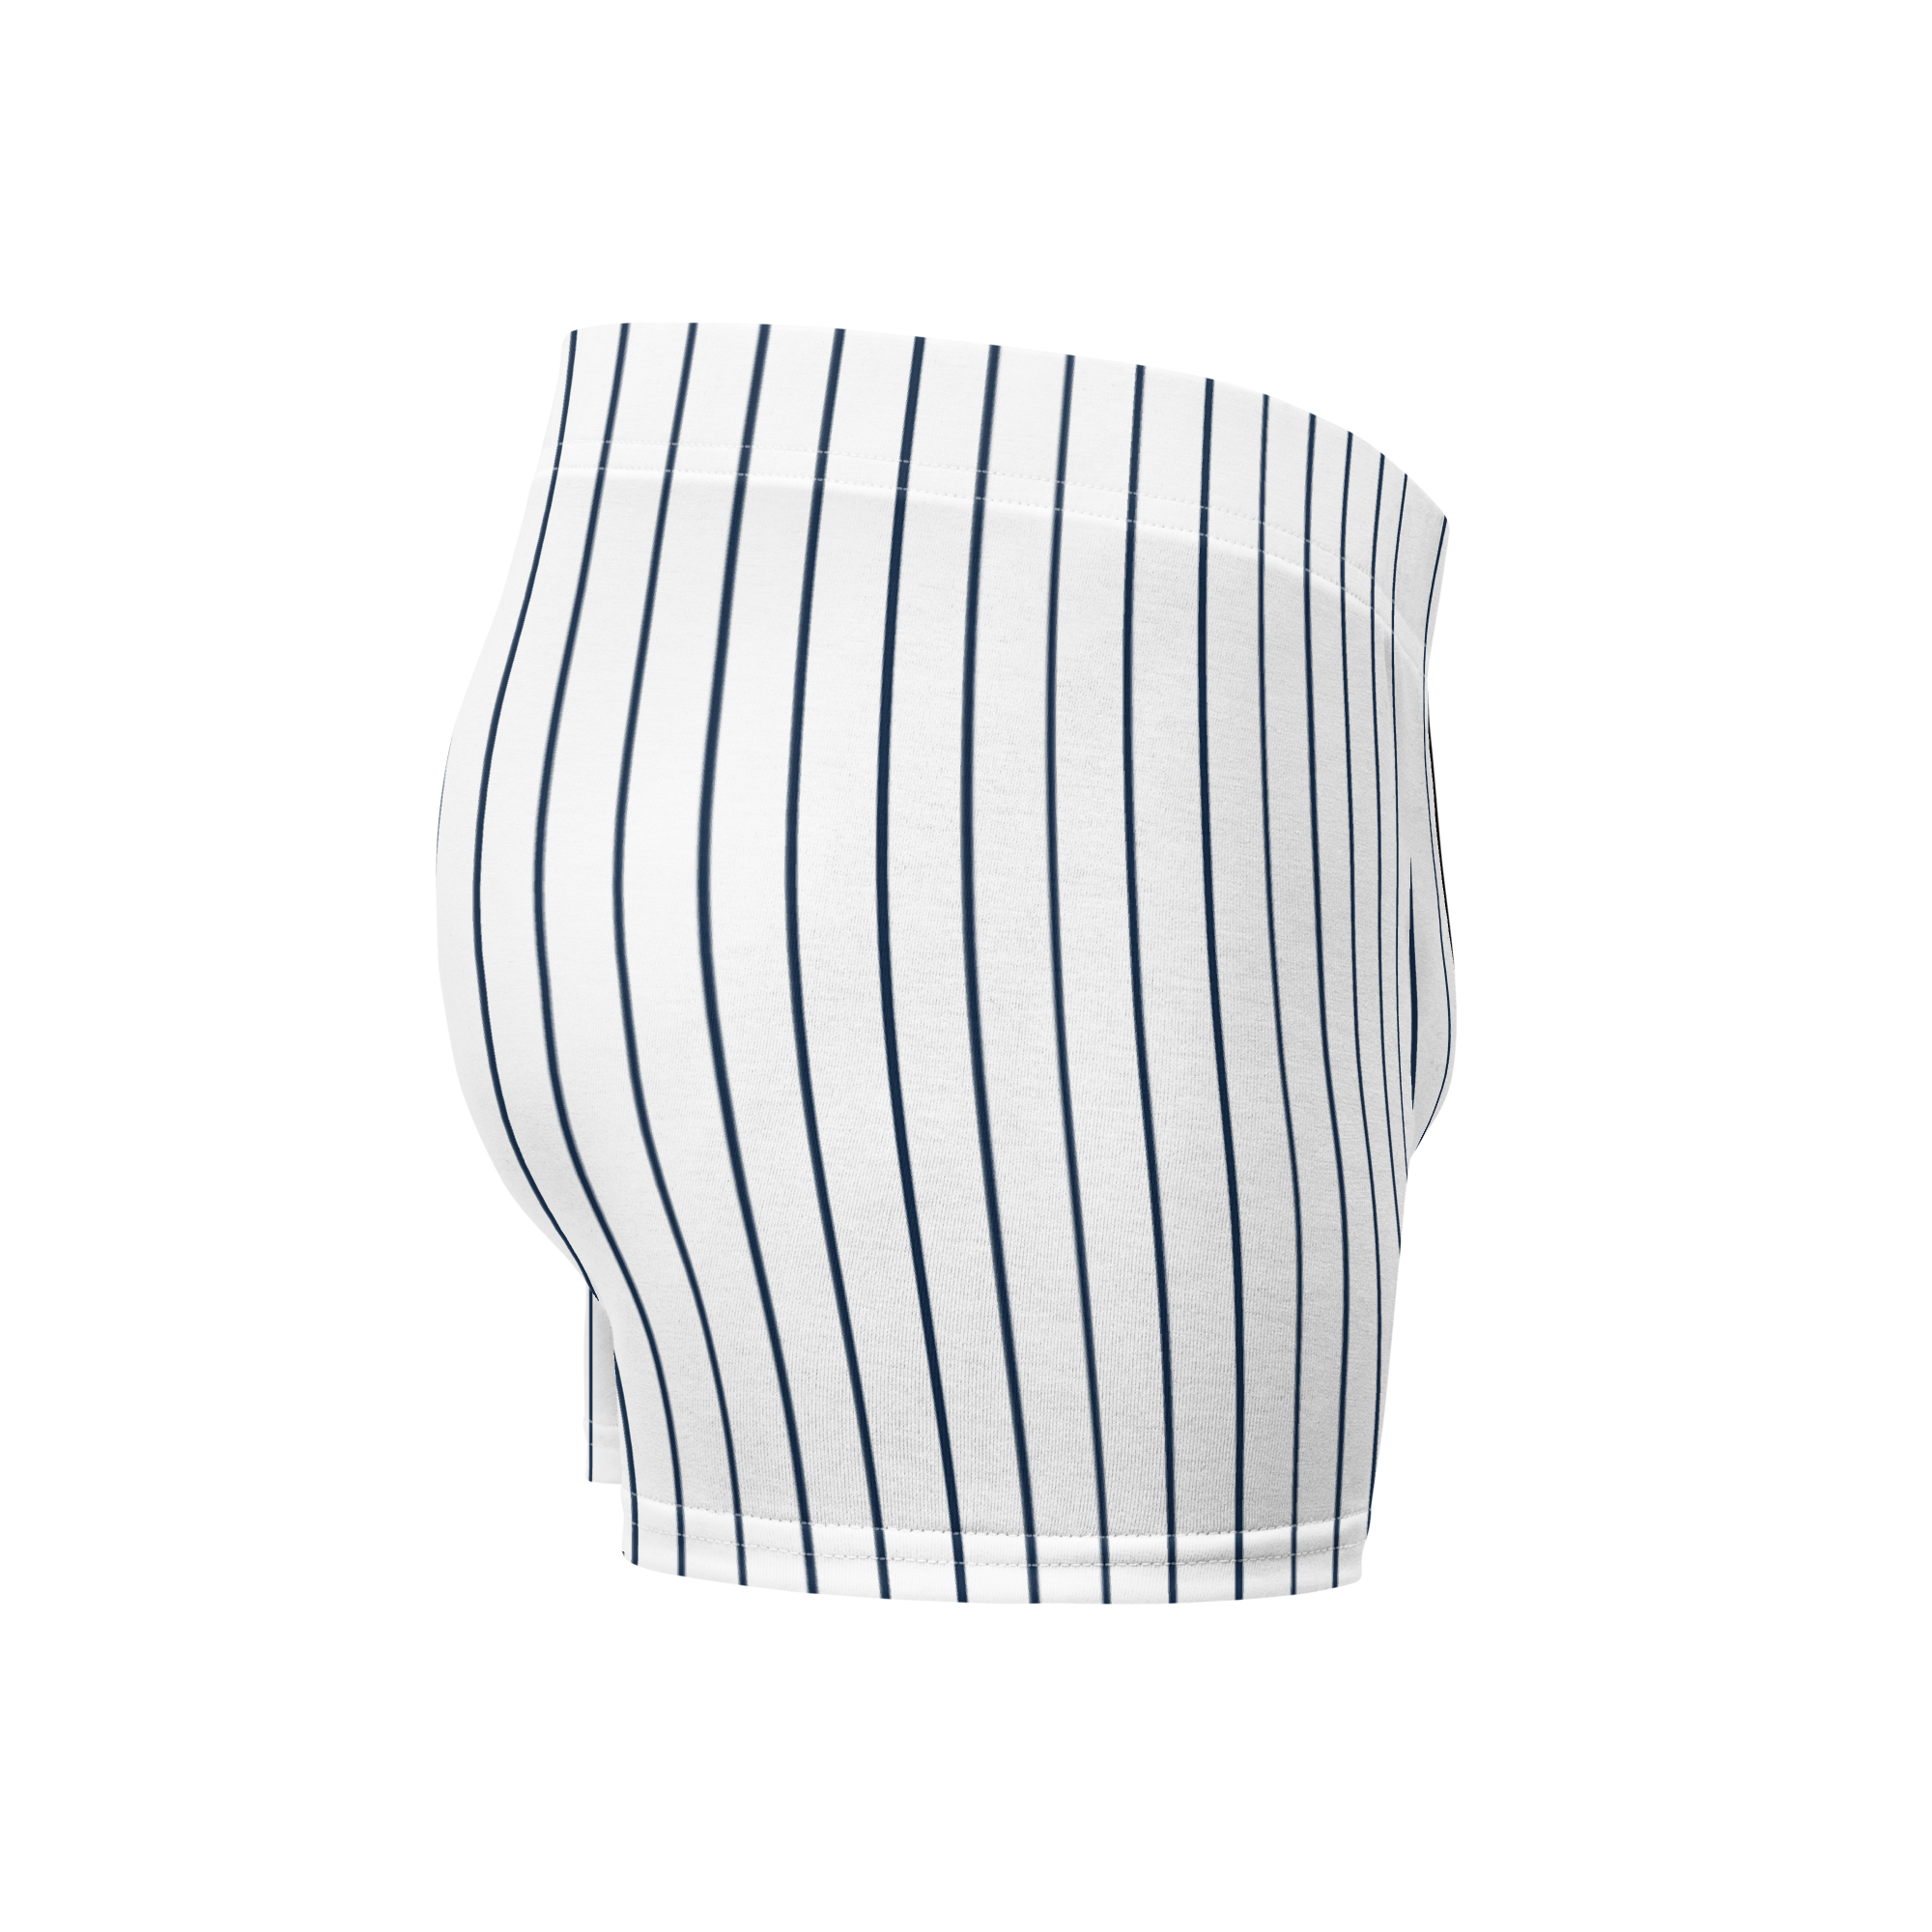 ROYAL Team Iconic. Athletix Boi Briefs Pinstripe Wh and Navy